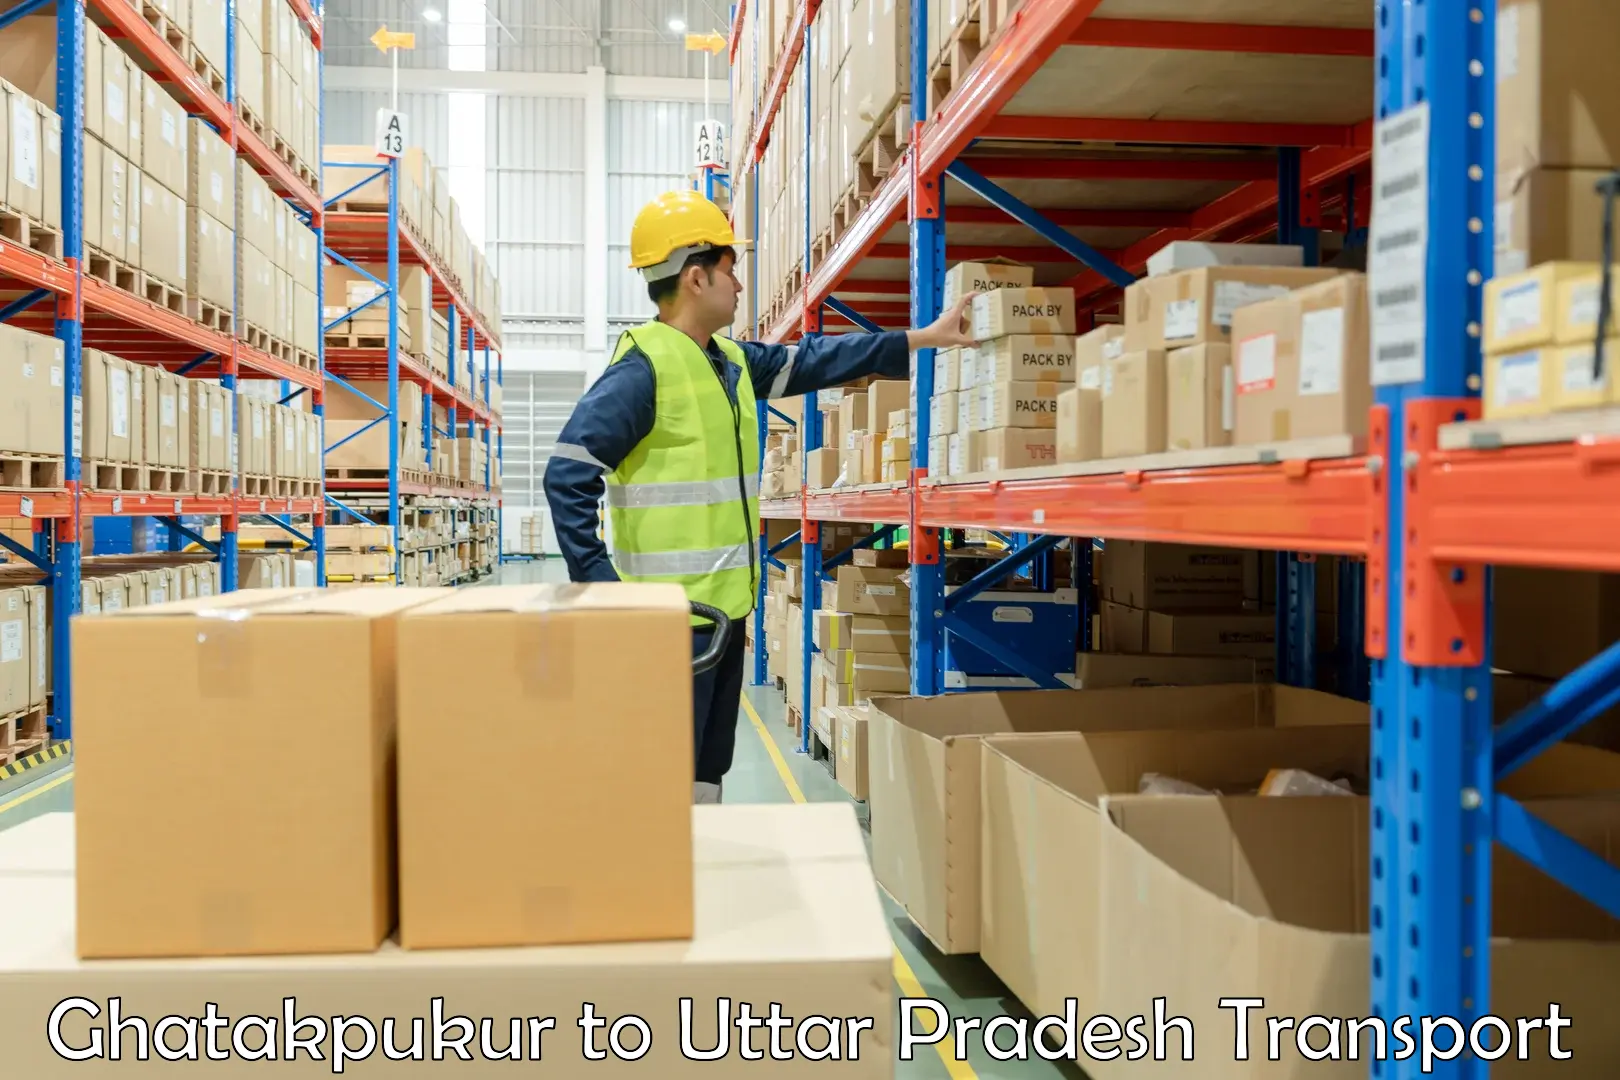 Shipping services in Ghatakpukur to Saharanpur